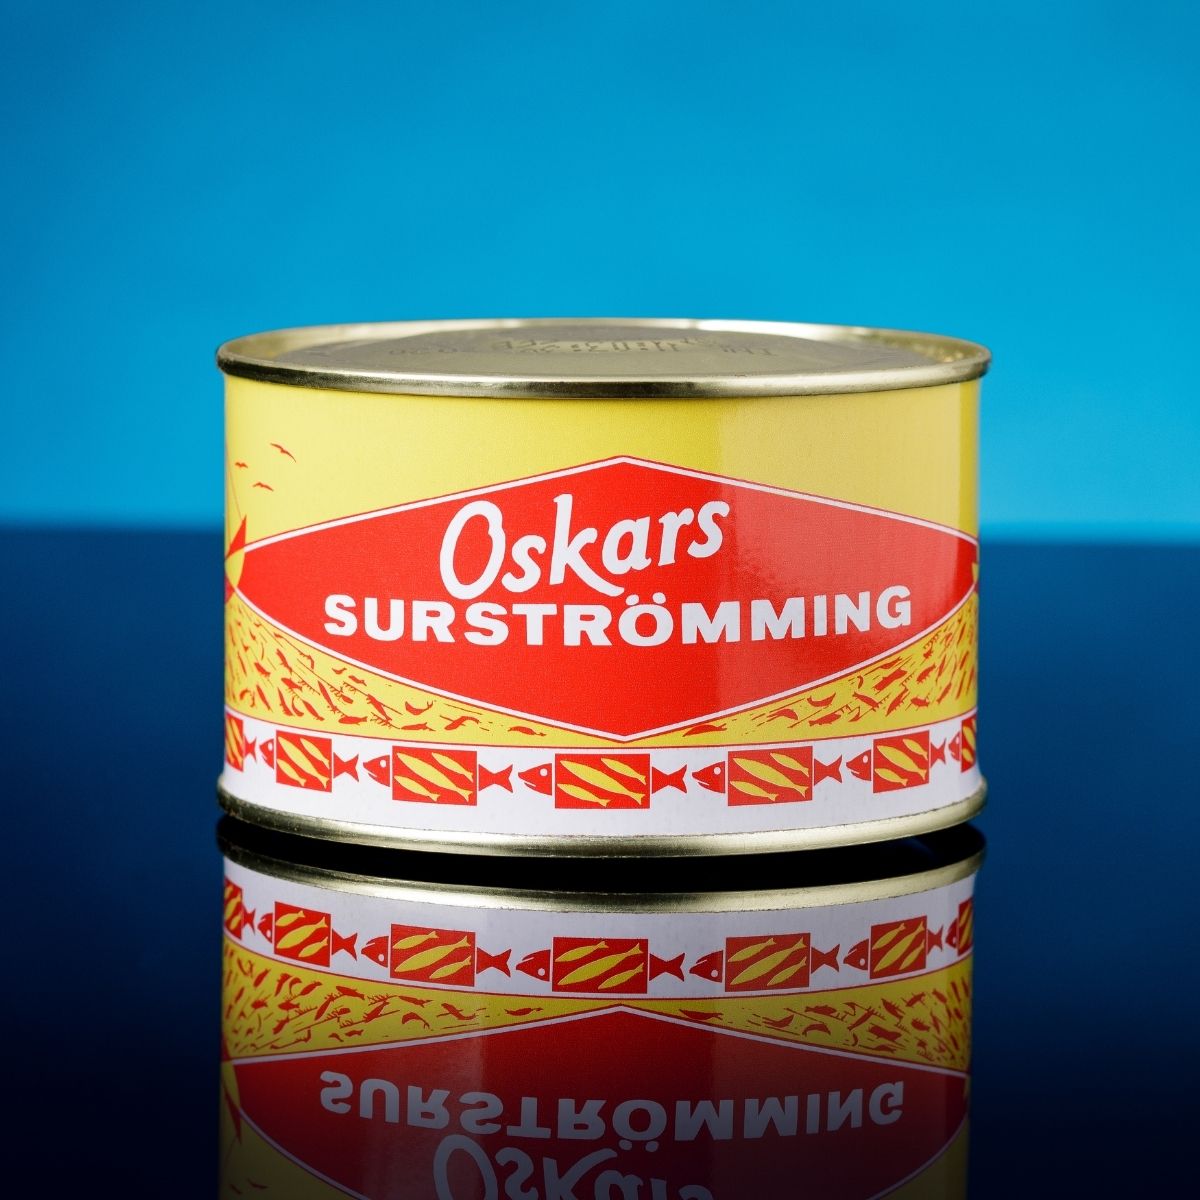 Today is Officially the Surströmming - Surstromming.com